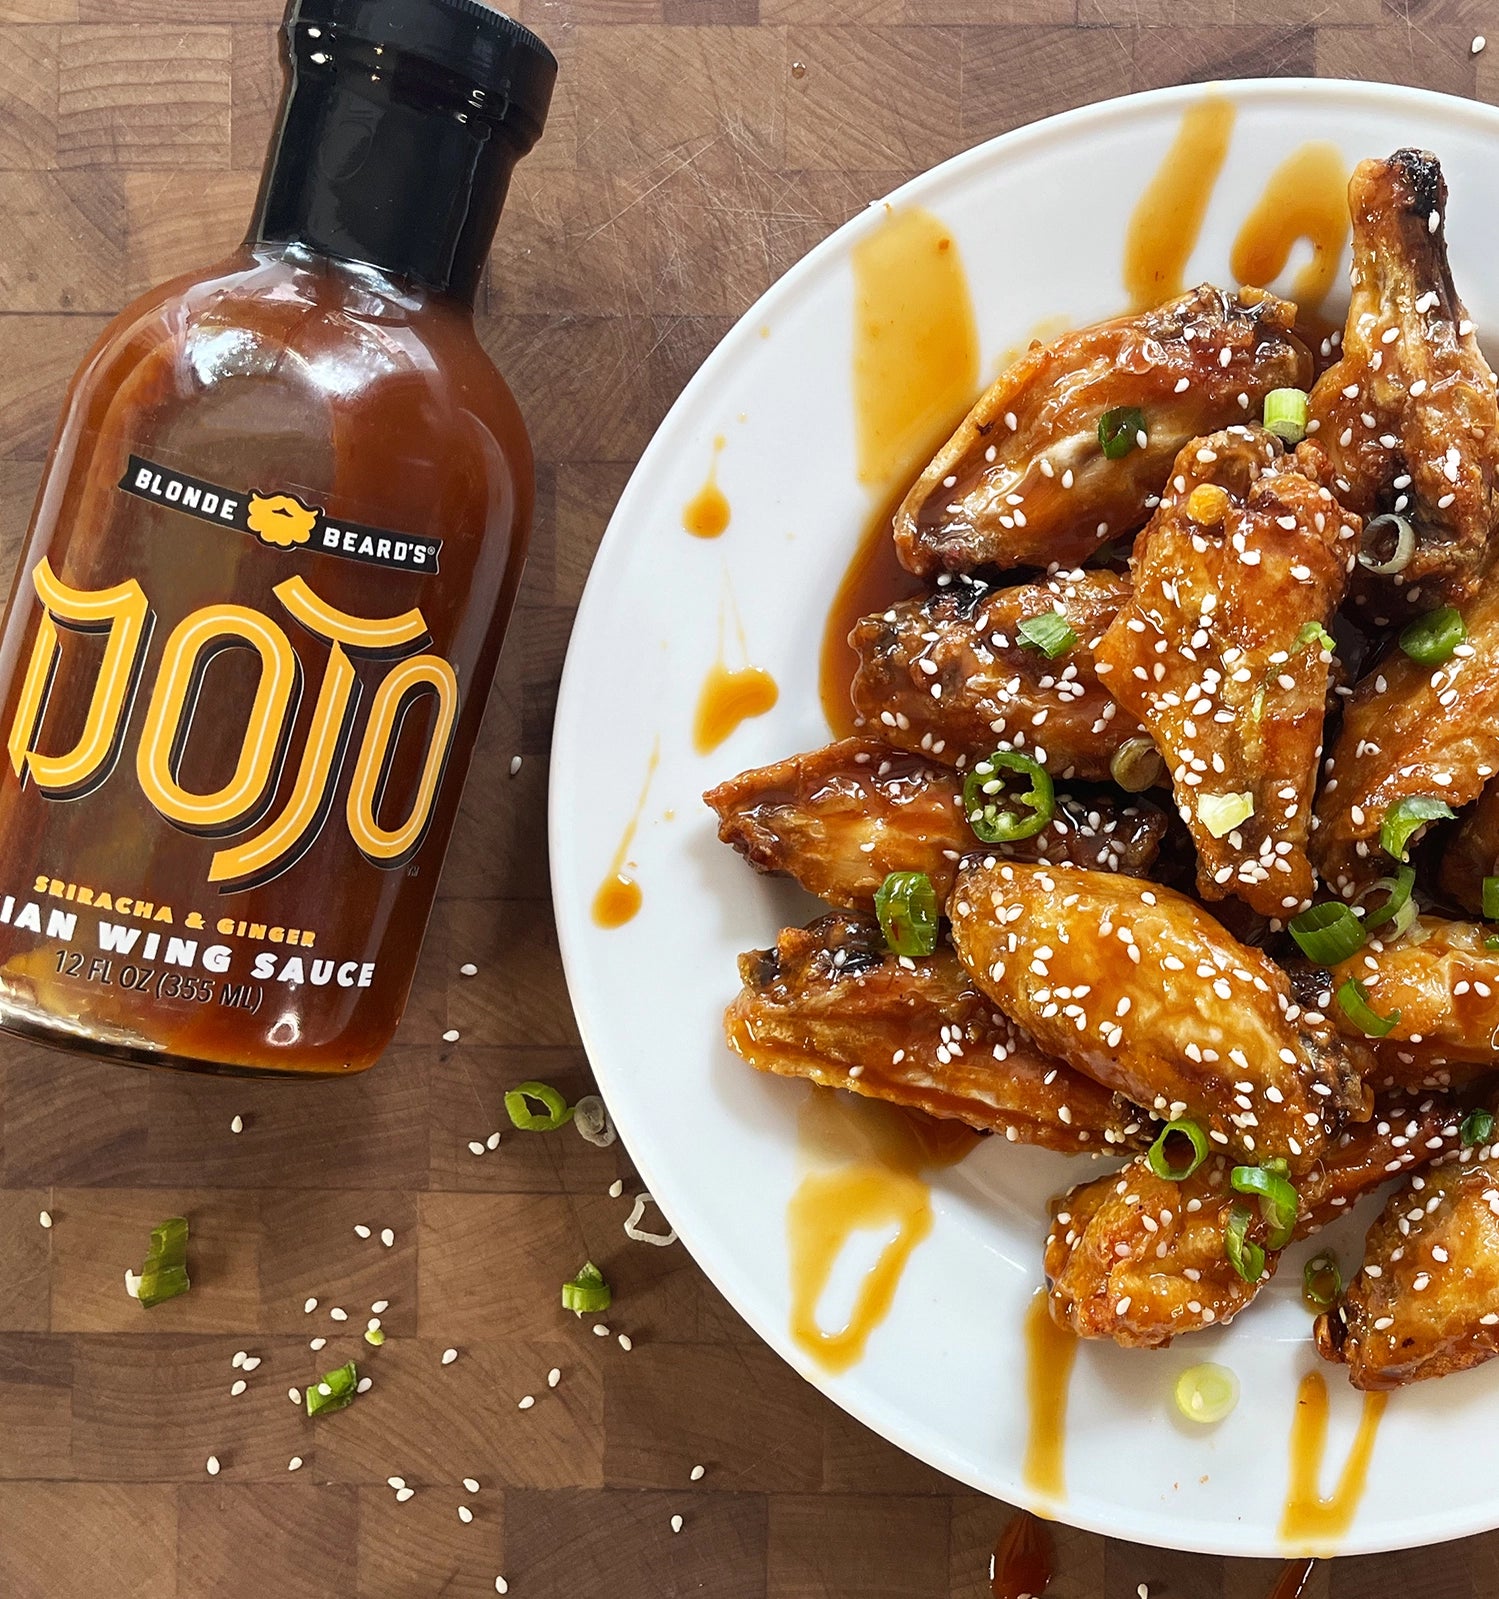 Dojo is a sriracha and ginger wing sauce.